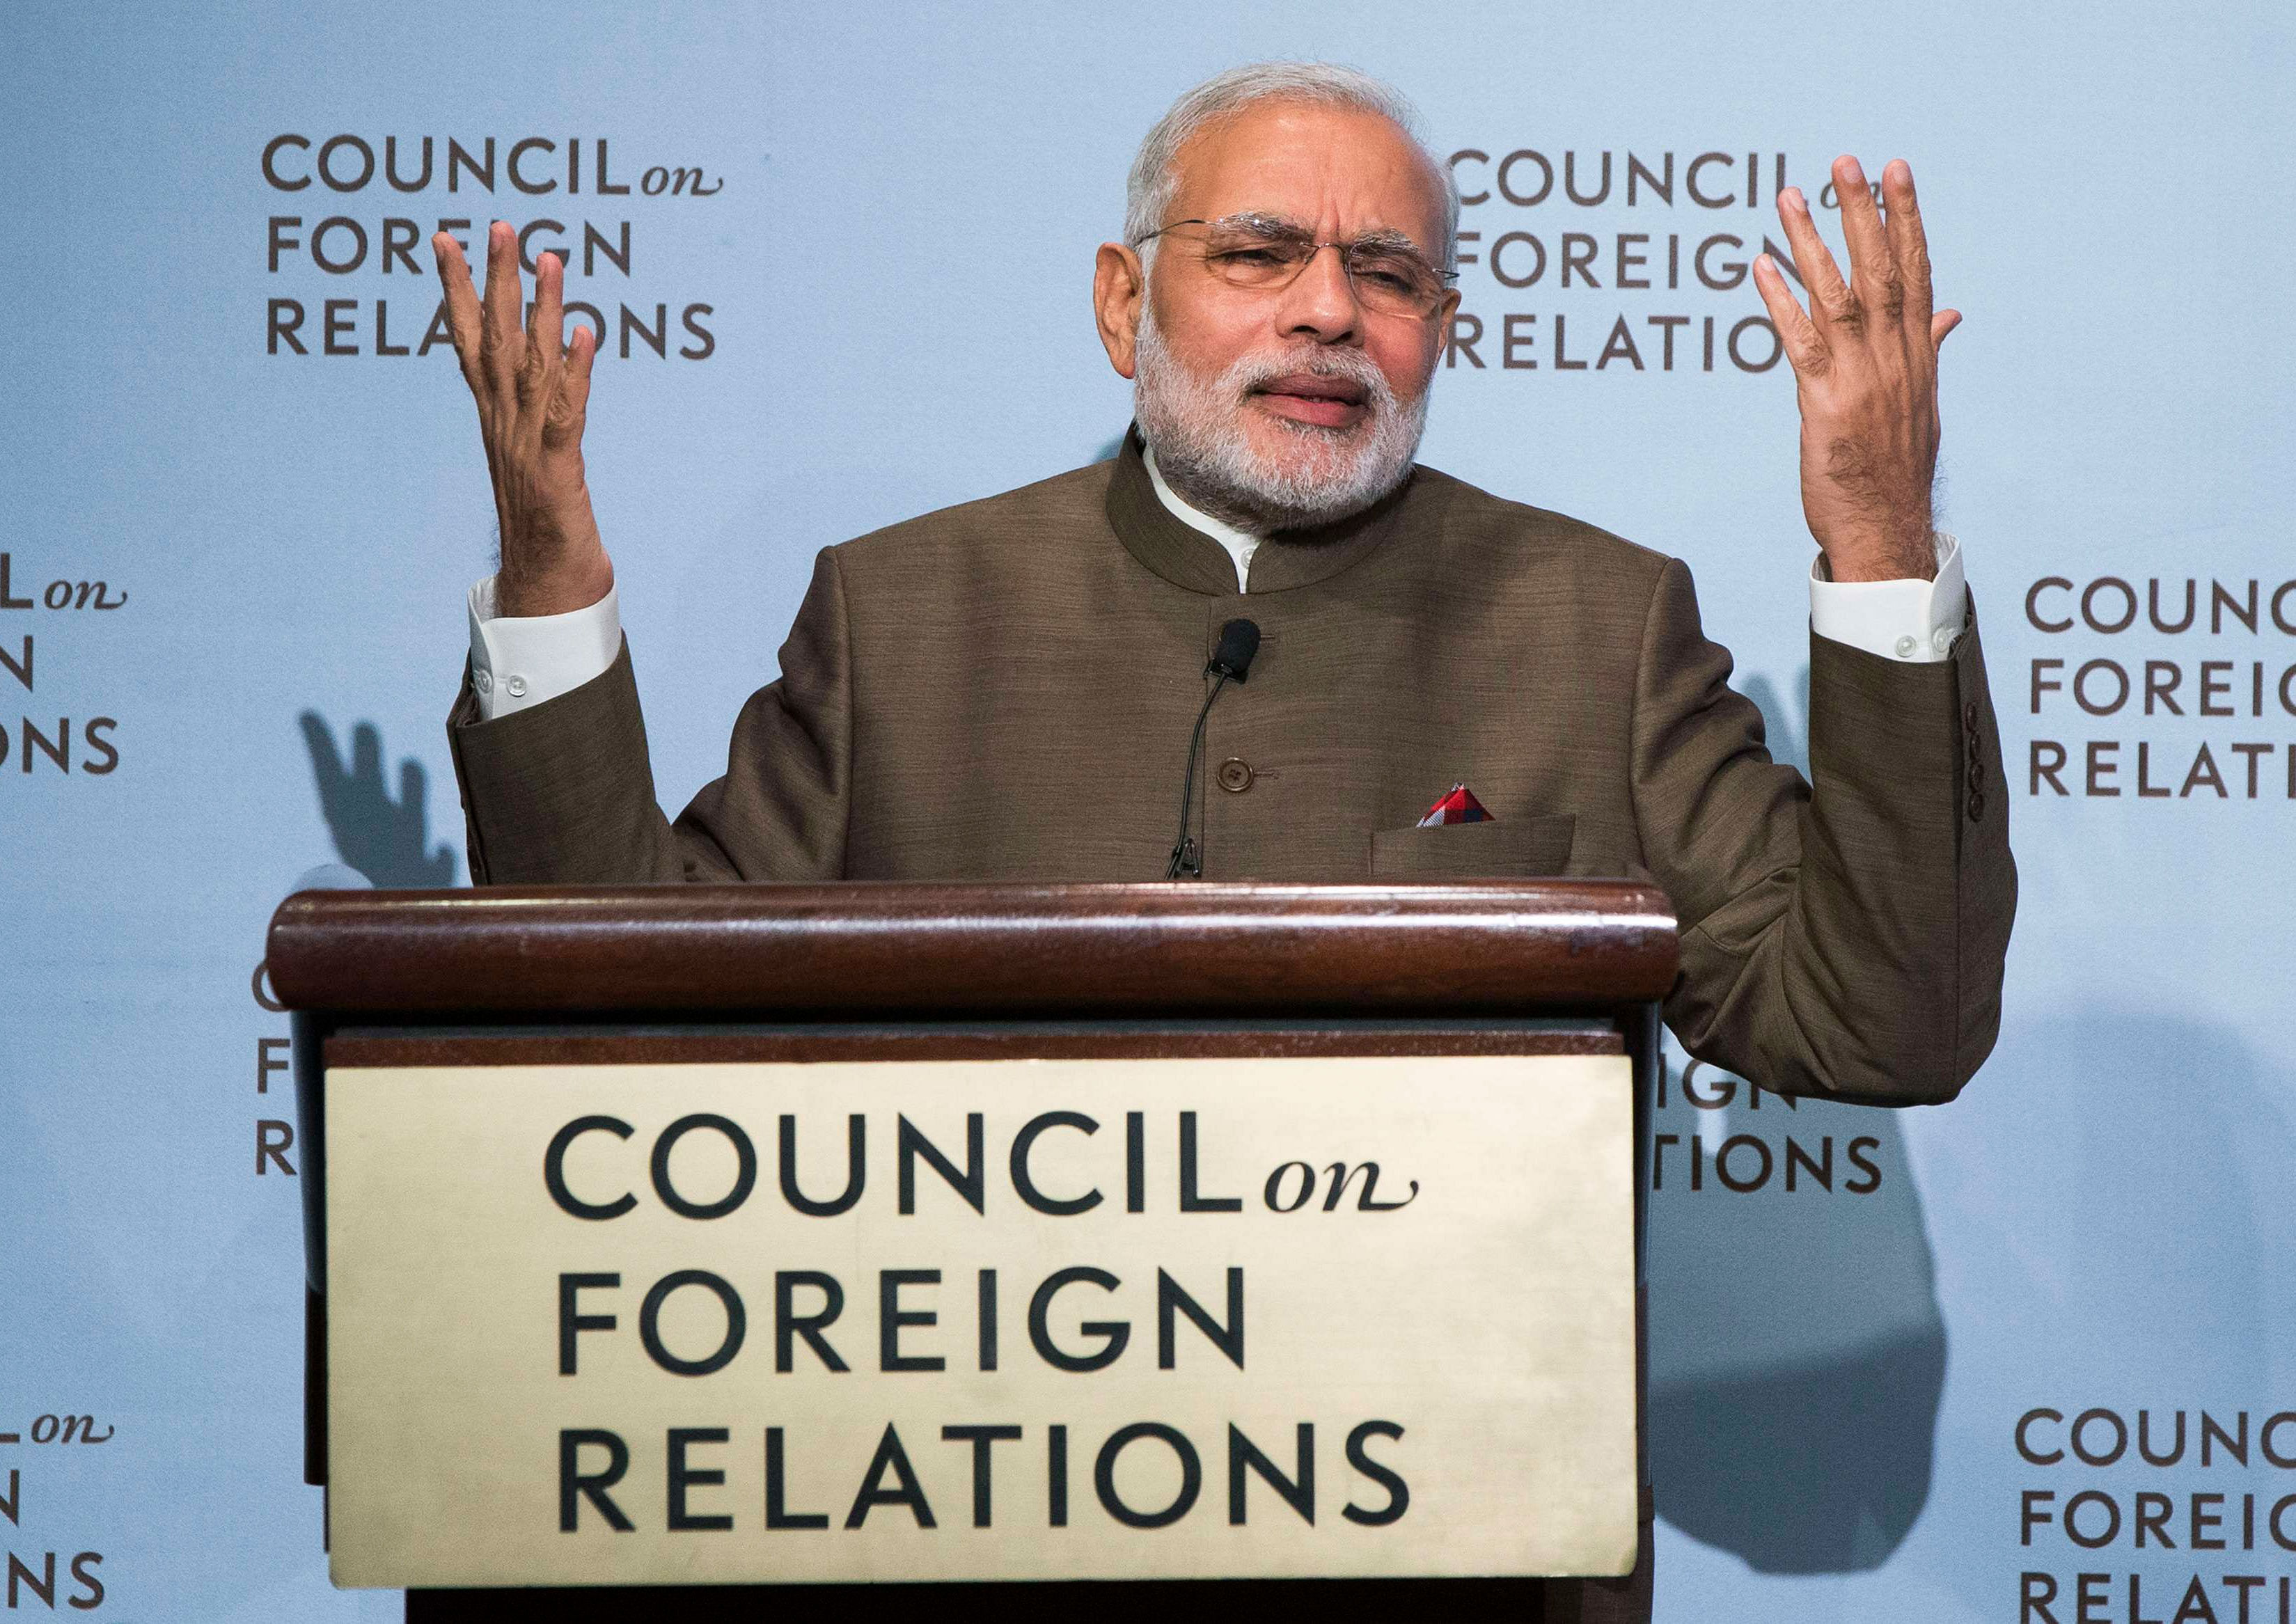 Indias Prime Minister Narendra Modi speaks at the Council on Foreign Relations in New York, during his visit to the United States September 29, 2014. REUTERS